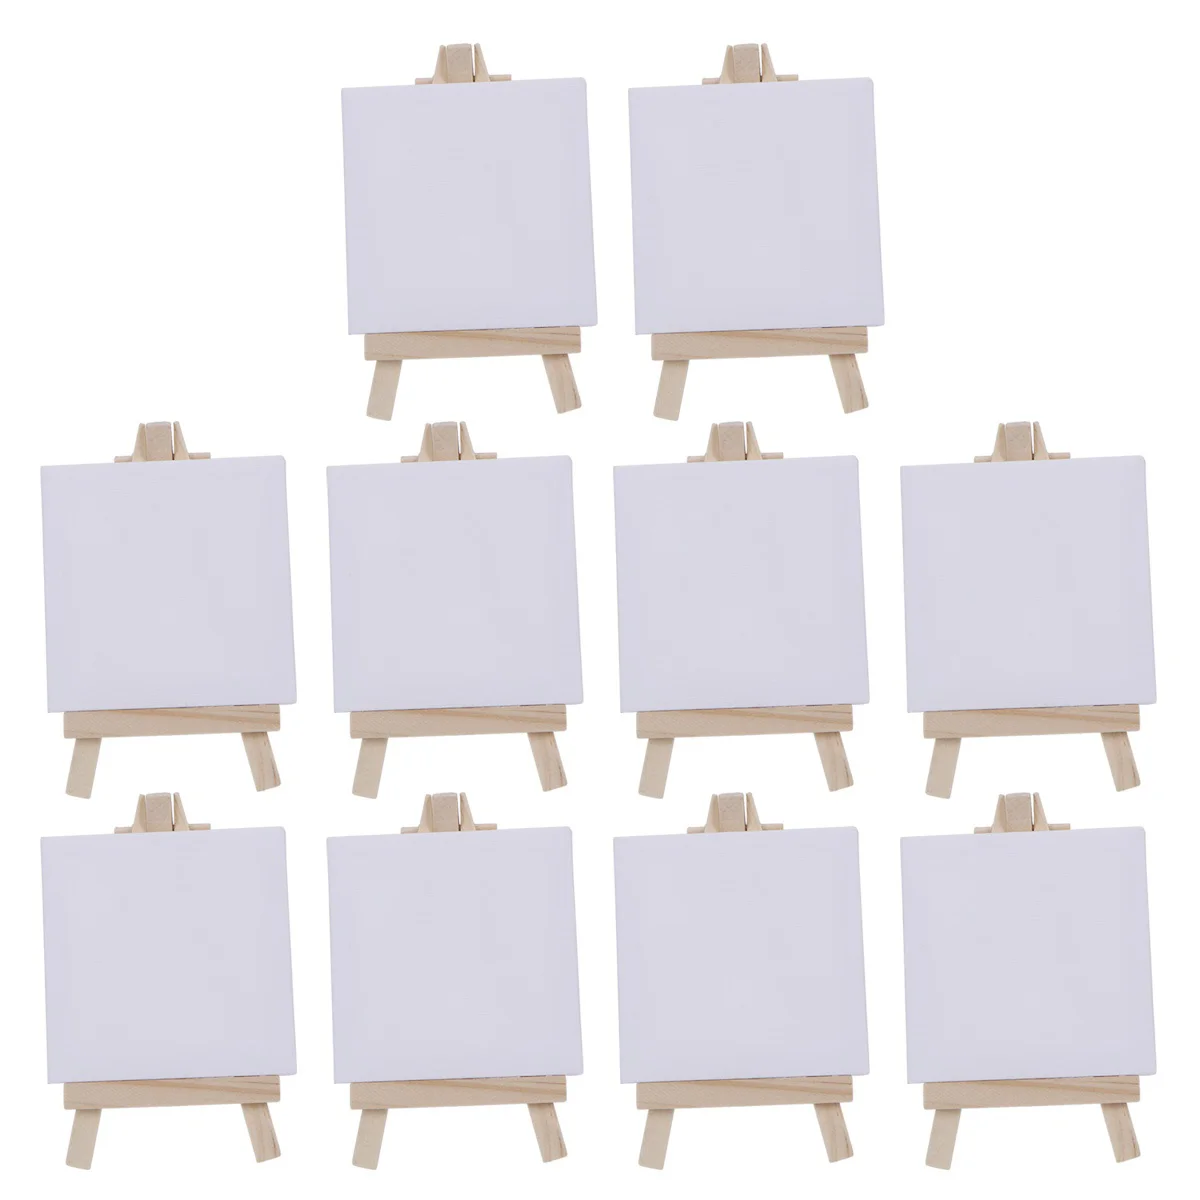 

10PCS Mini Canvas Panel Wooden Easel Sketchpad Settings for Painting Craft Drawing Decoration Gift and Kids'Learning Easels